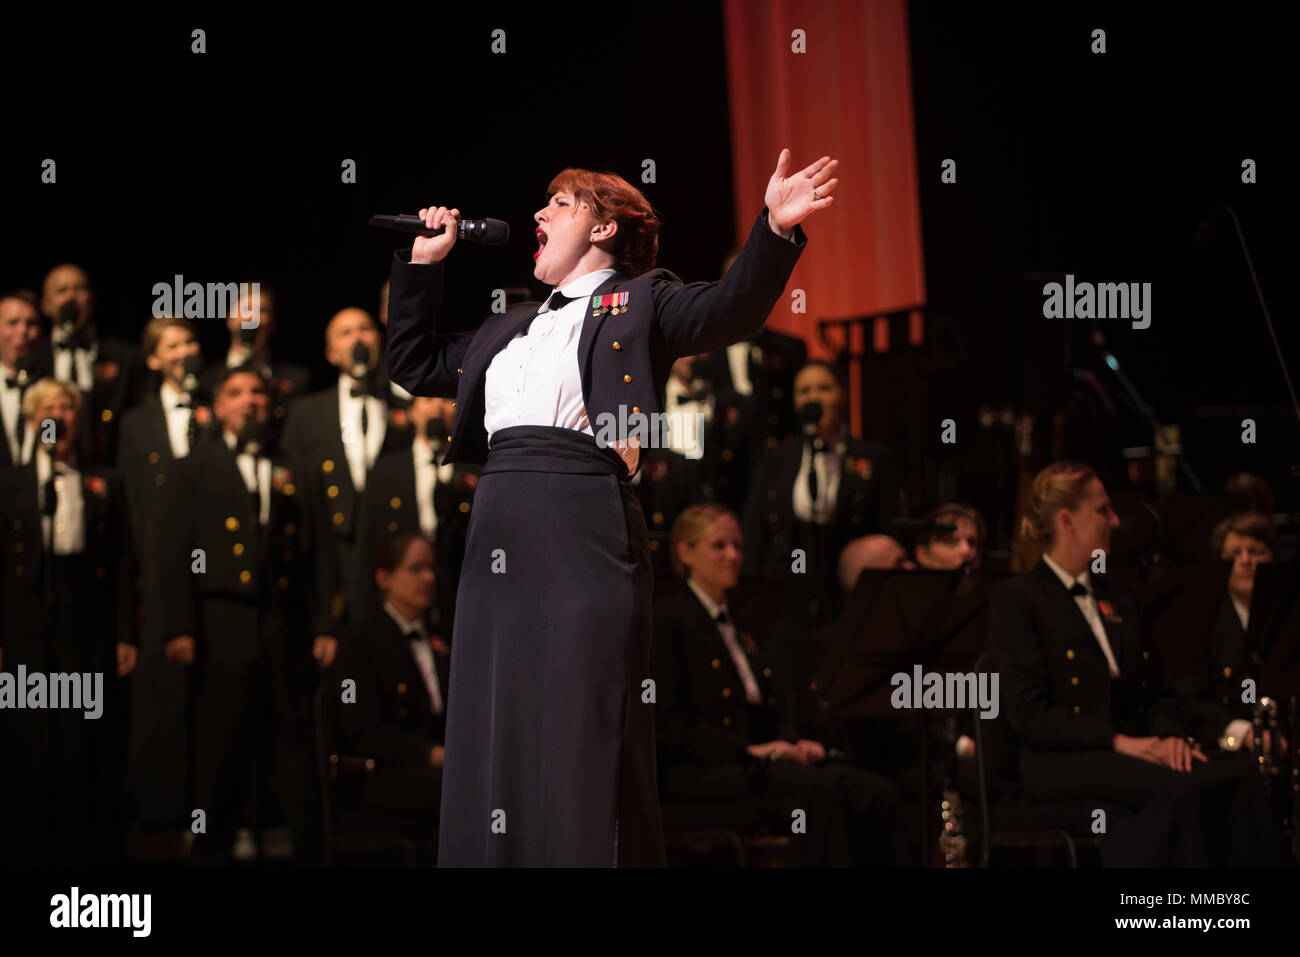 171005-N-VV903-1137 BETHESDA, Md. (Oct. 05, 2017)  Musician 1st class Maia Rodriguez from Cleveland, Ohio, performs with the U.S. Navy Band at the Music Center at Strathmore in Bethesda, Maryland for the celebration of the 242nd birthday of the U.S. Navy. Each October, the U.S. Navy Band celebrates the birth of the United States Navy with an annual concert that highlights the diversity of the Navy, its various missions around the globe and its rich history and heritage and honors veterans and all who serve. (U.S. Navy photo by Musician 1st Class David Aspinwall/Released) Stock Photo